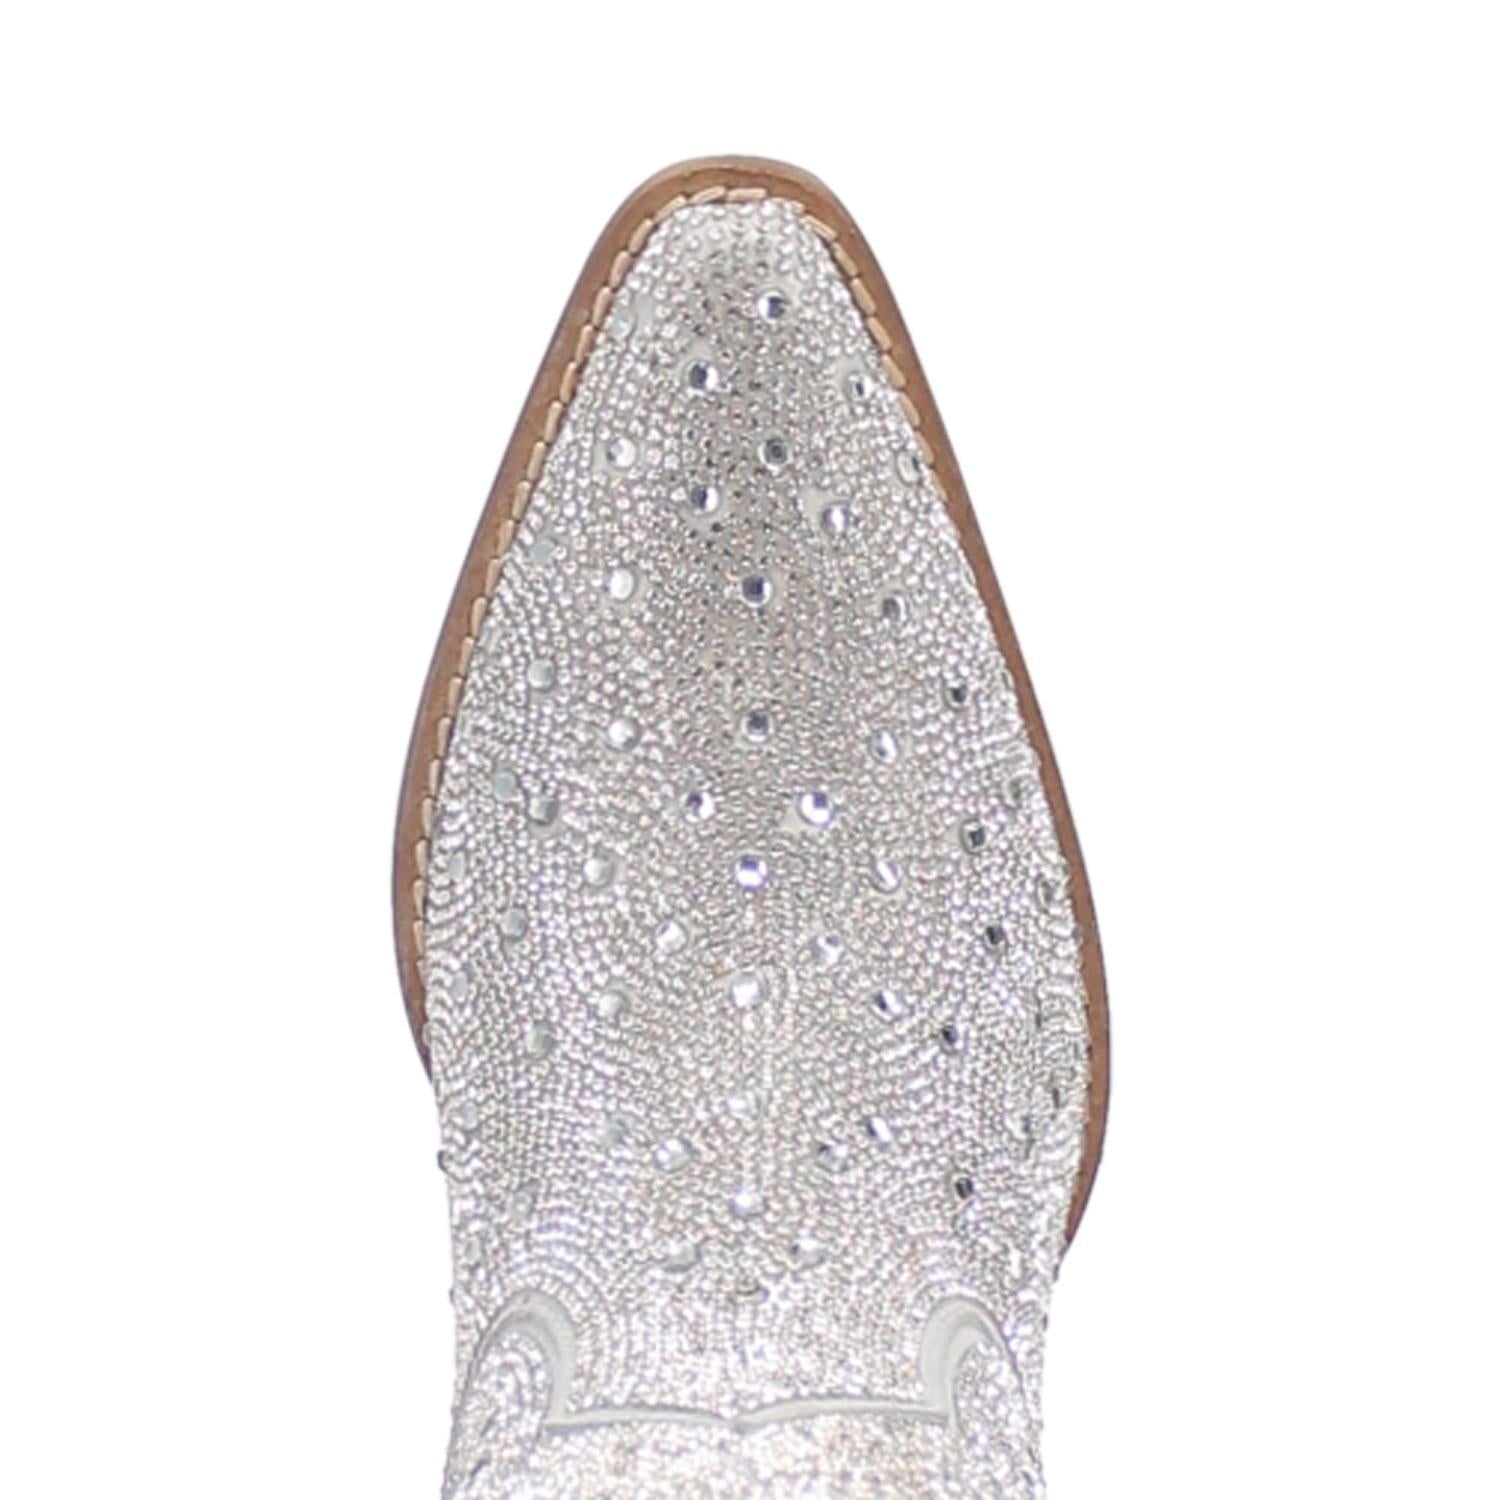 A mid calf length white boot with rhinestones from top to bottom, matching leather straps, a short heel, and a V cut at the top. Item is pictured on a white background